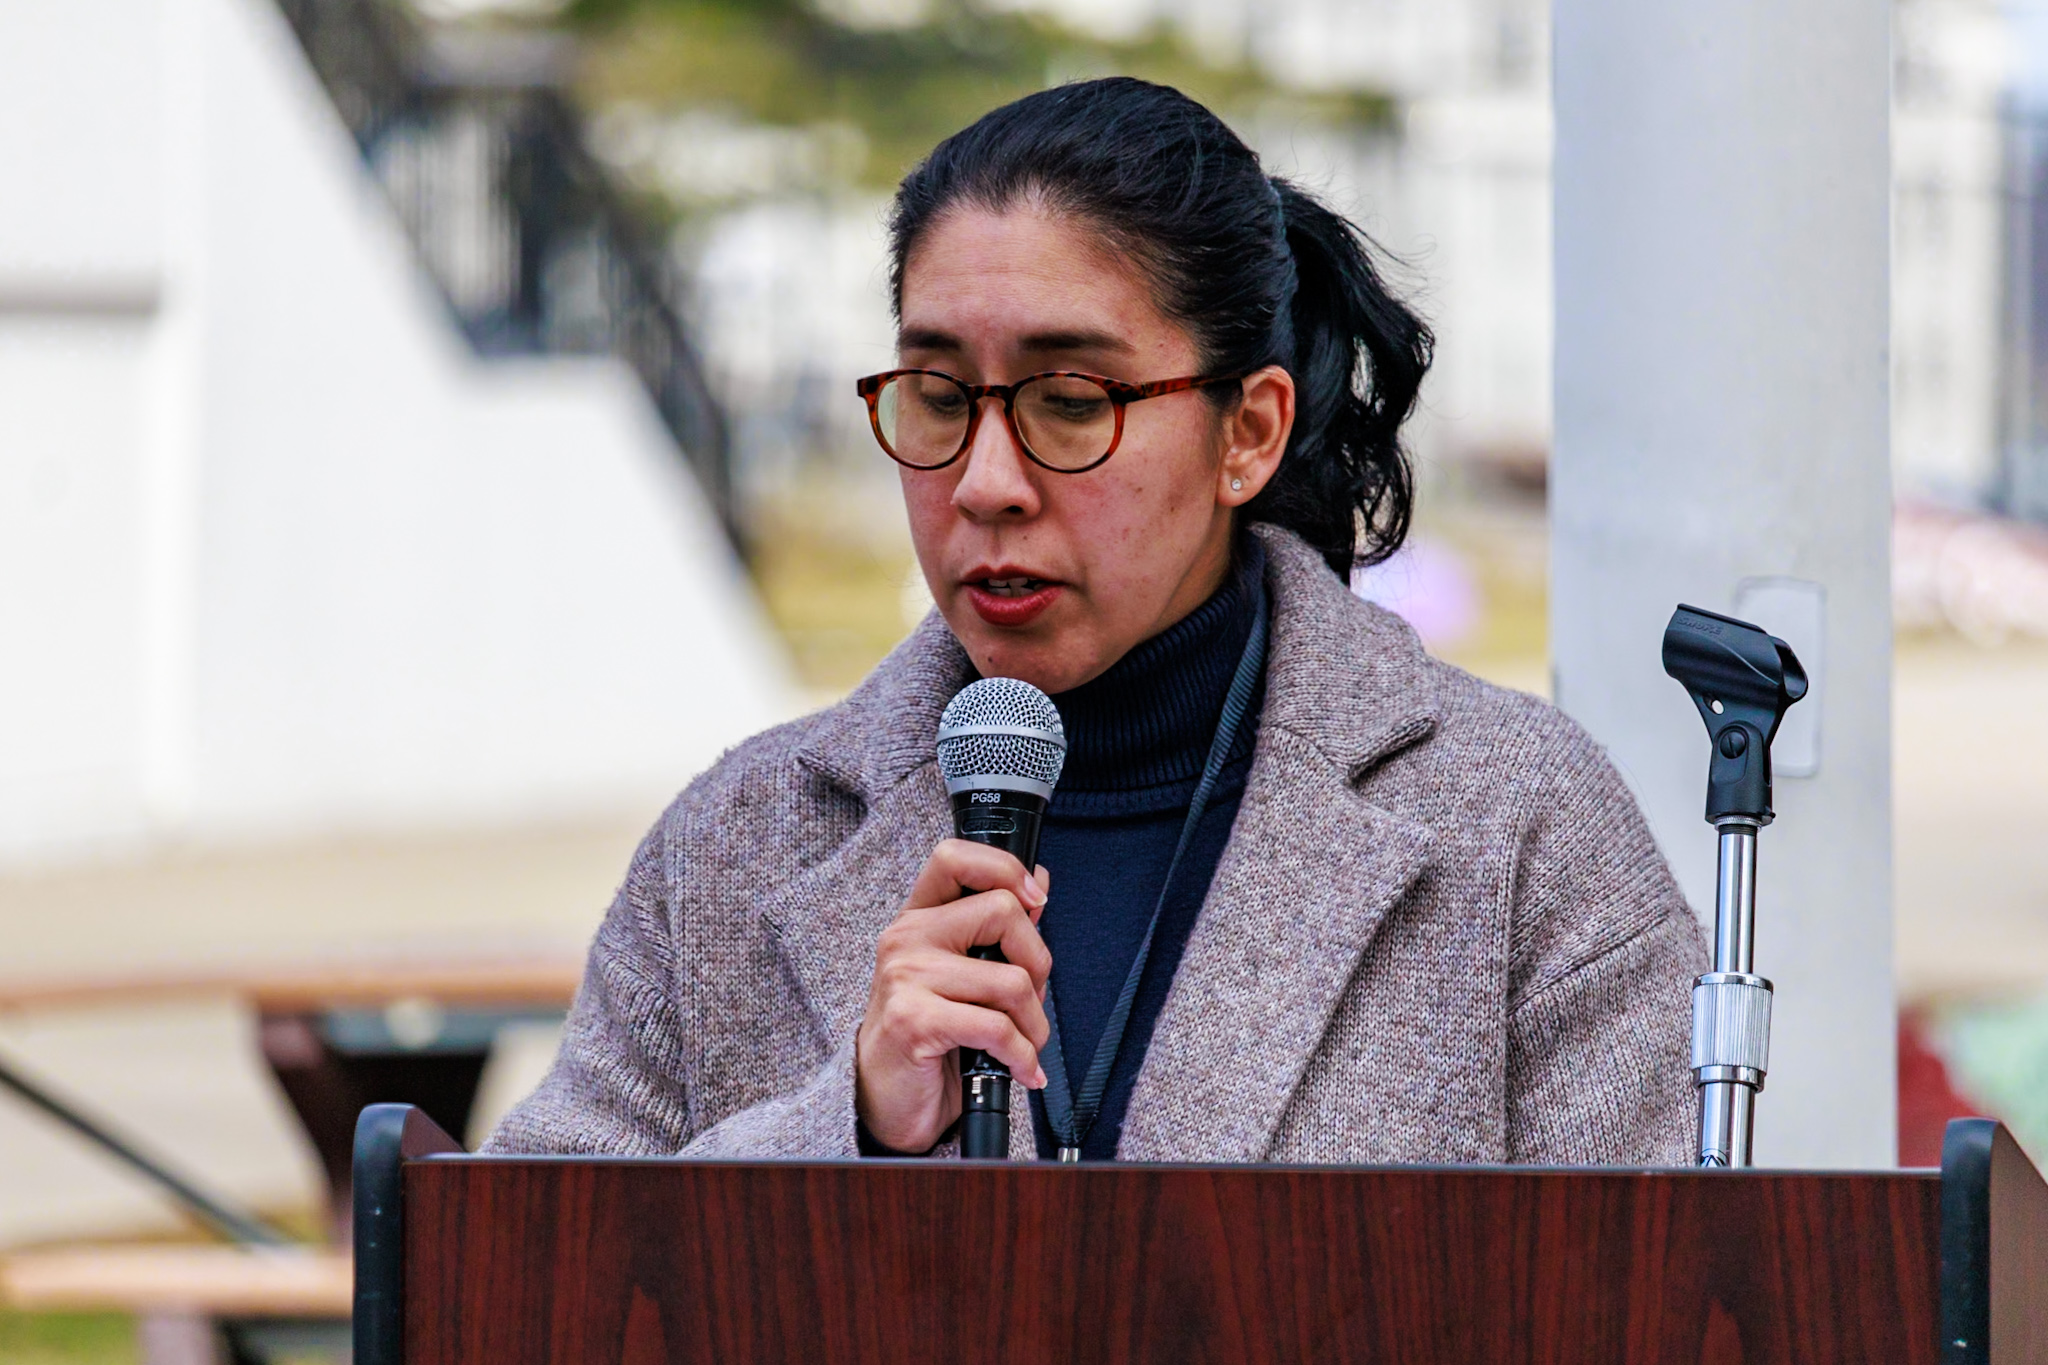 A faculty member speaks at the flag-raising event.
Sal DiMaggio | The Montclarion